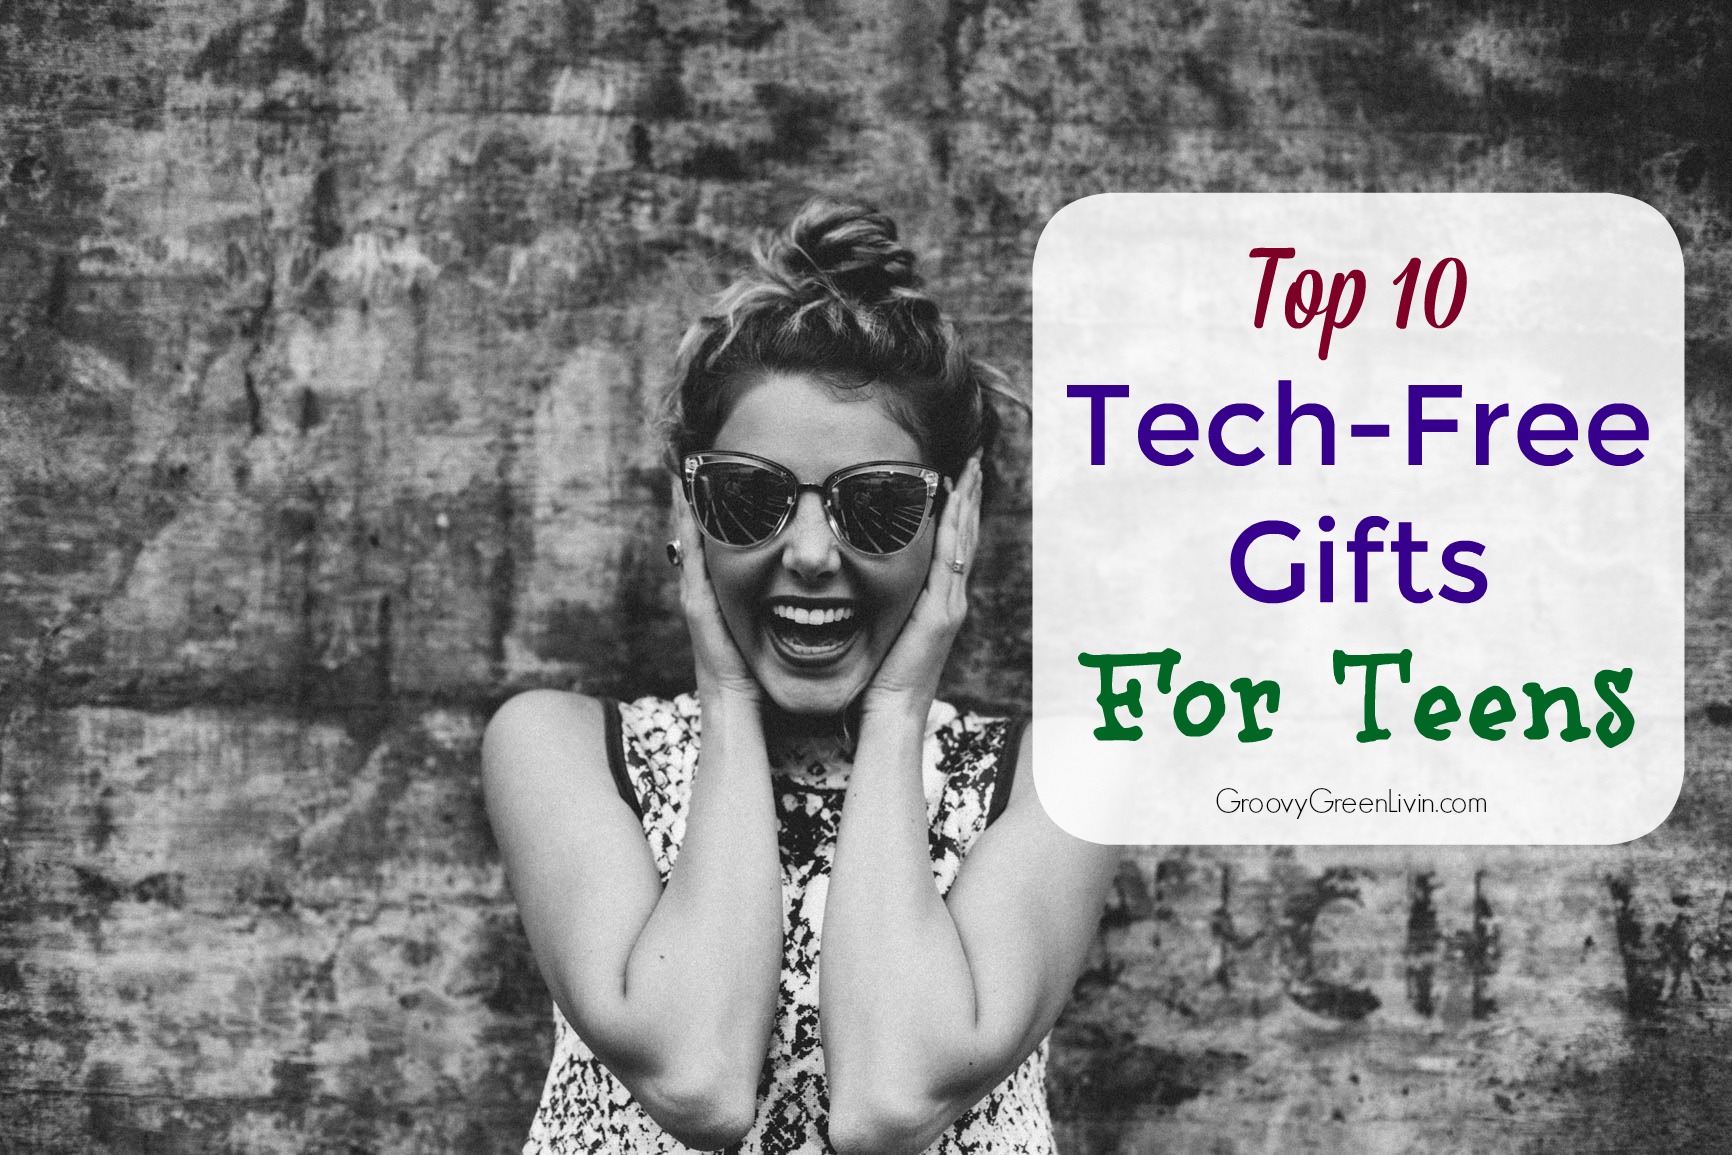 Top 10 Tech-Free Gifts For Teens